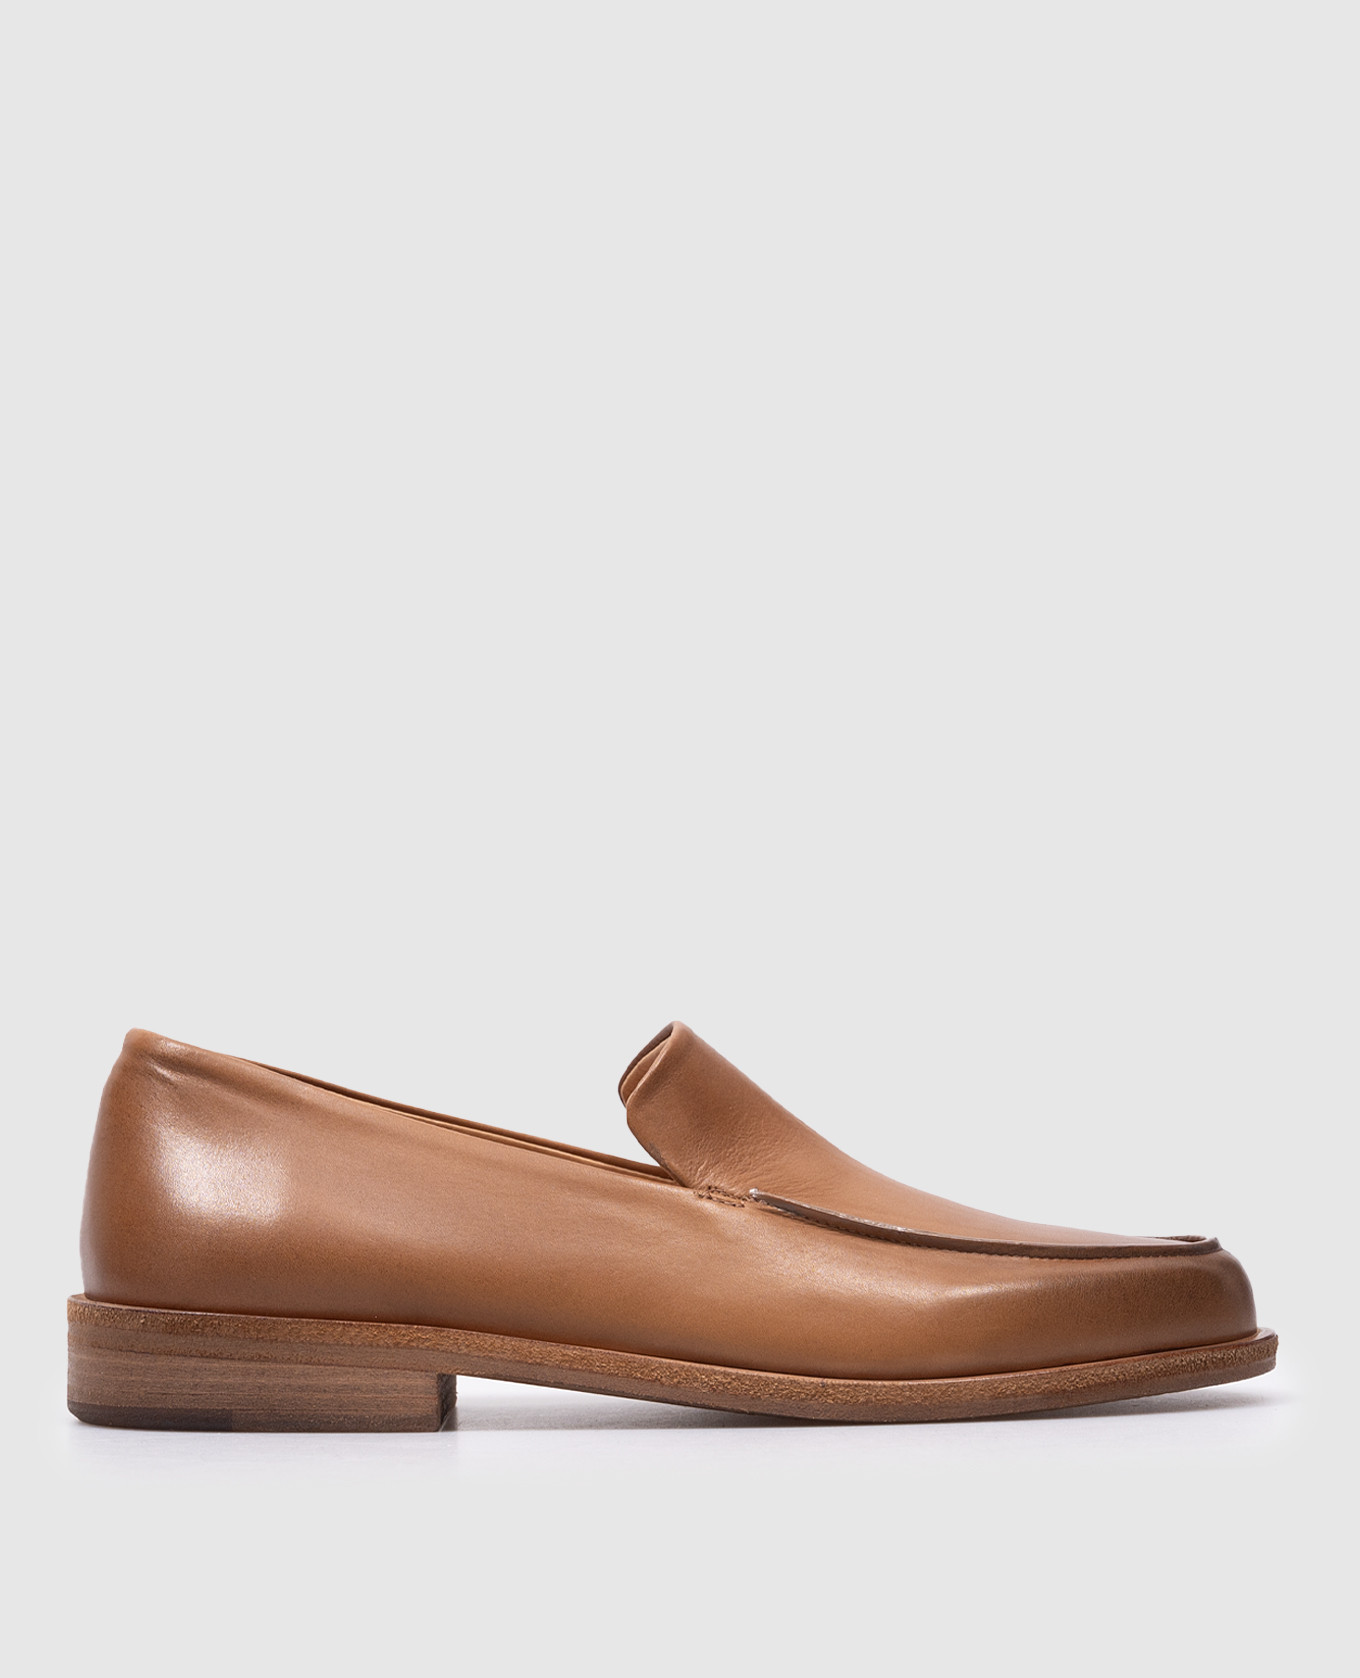 Mocasso brown leather loafers